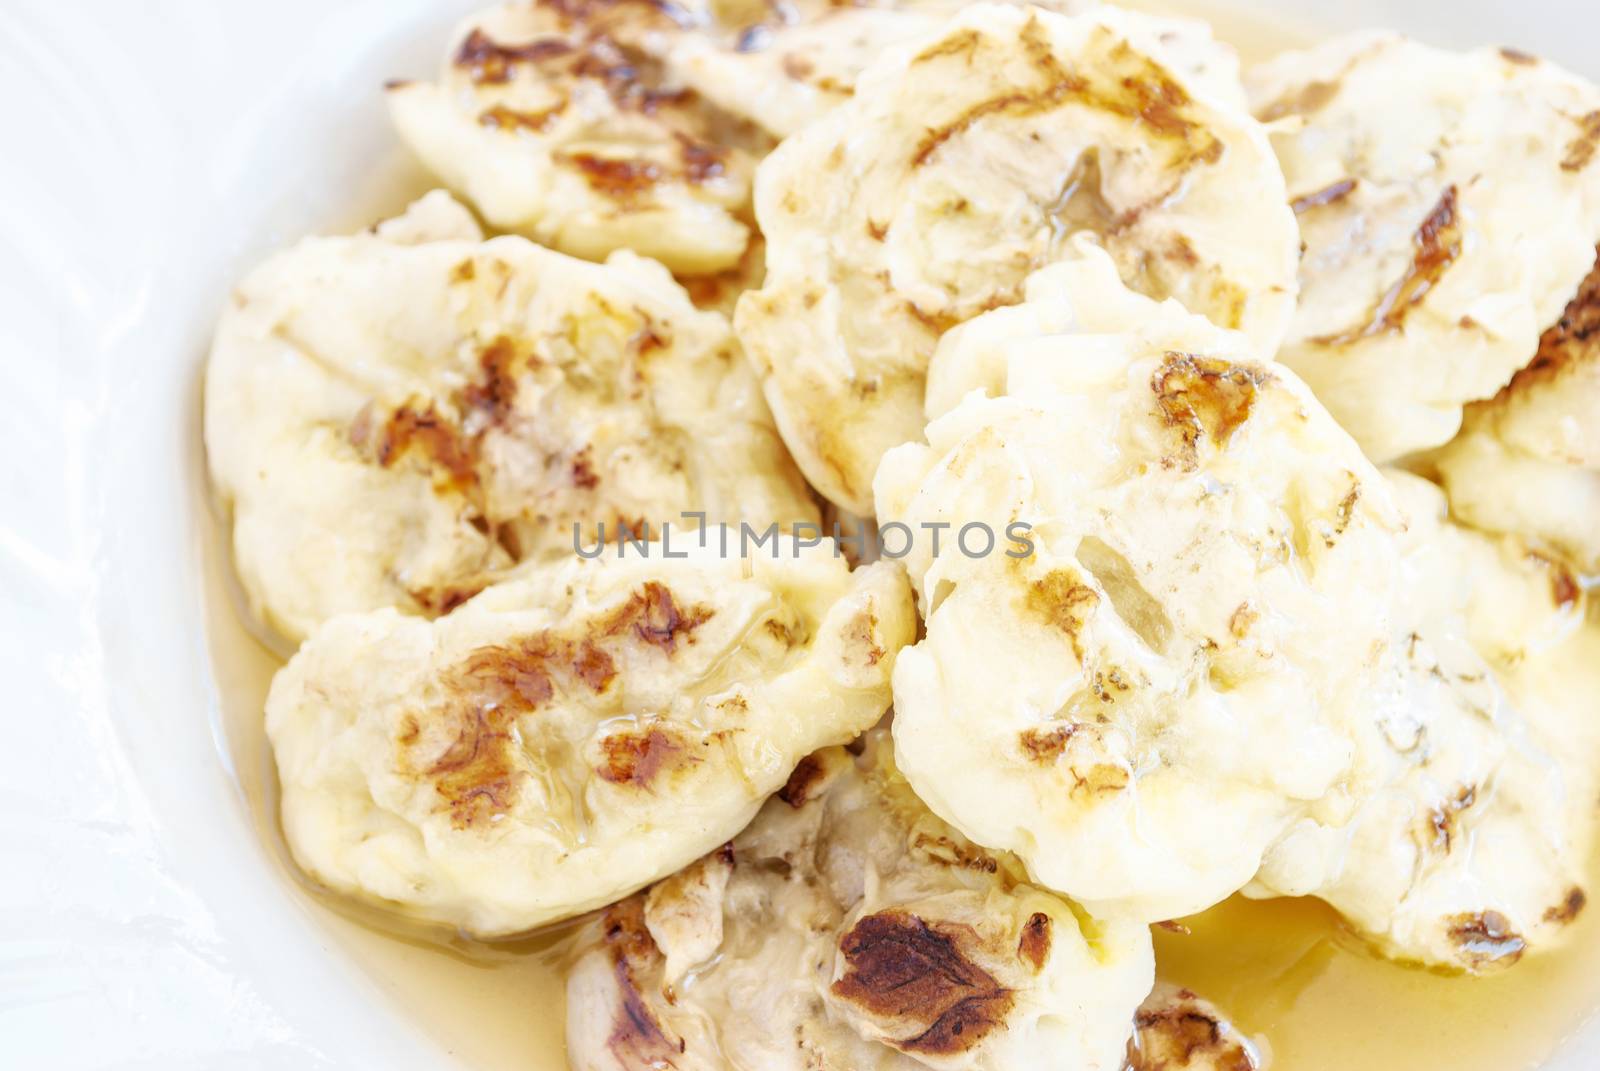 Grilled bananas with syrup, dessert in Thailand by rakoptonLPN